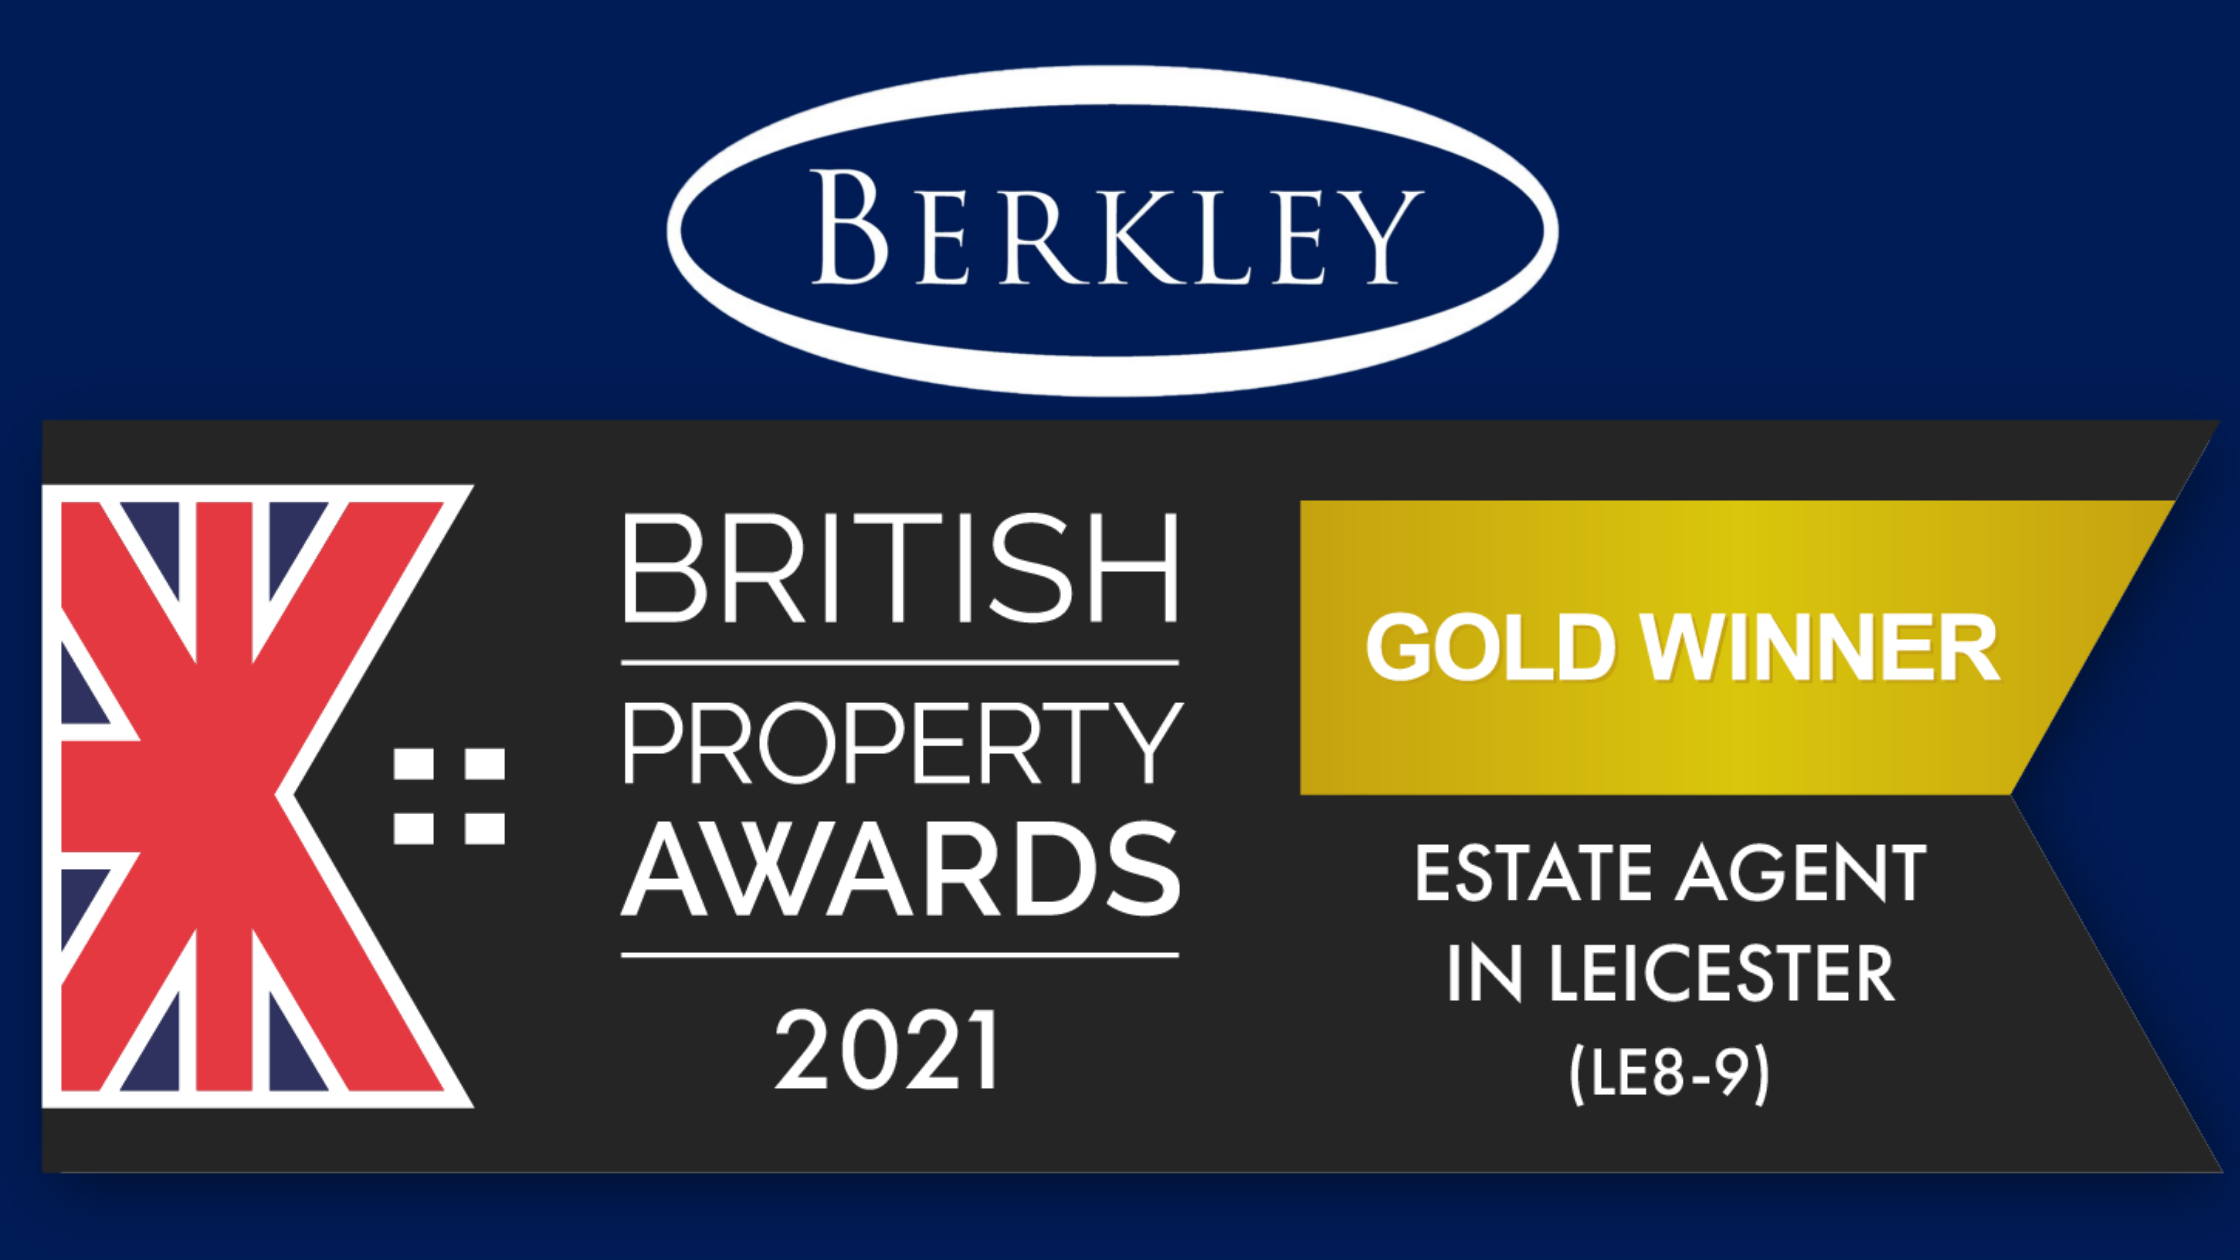 Berkley Win Gold at British Property Awards for Best Estate Agent in Leicester (LE8-9)